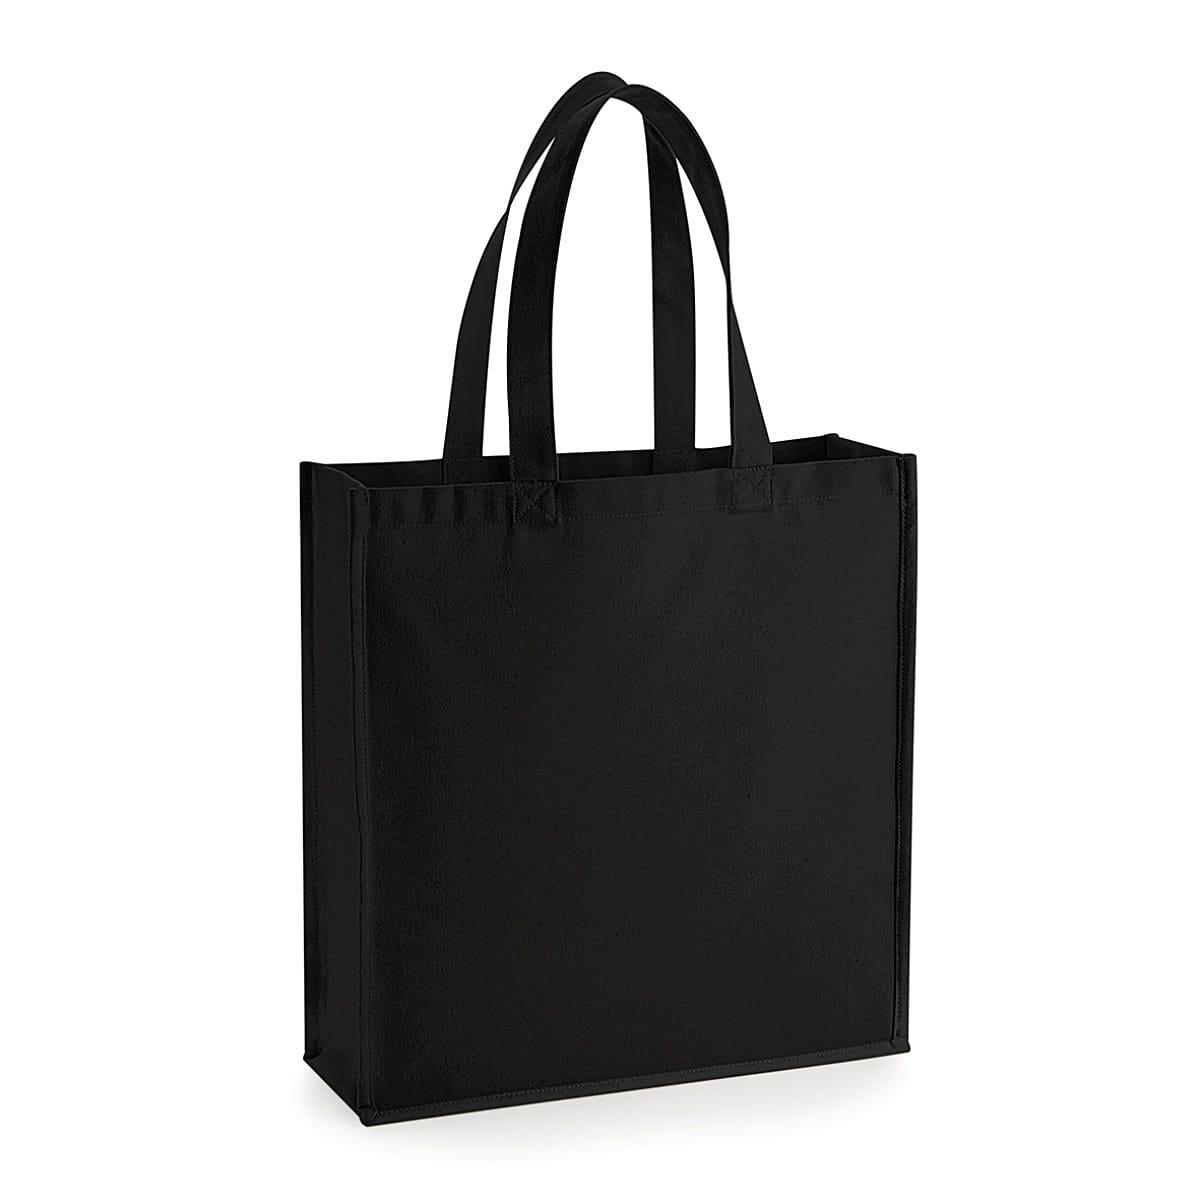 Westford Mill Gallery Canvas Tote in Black (Product Code: W600)